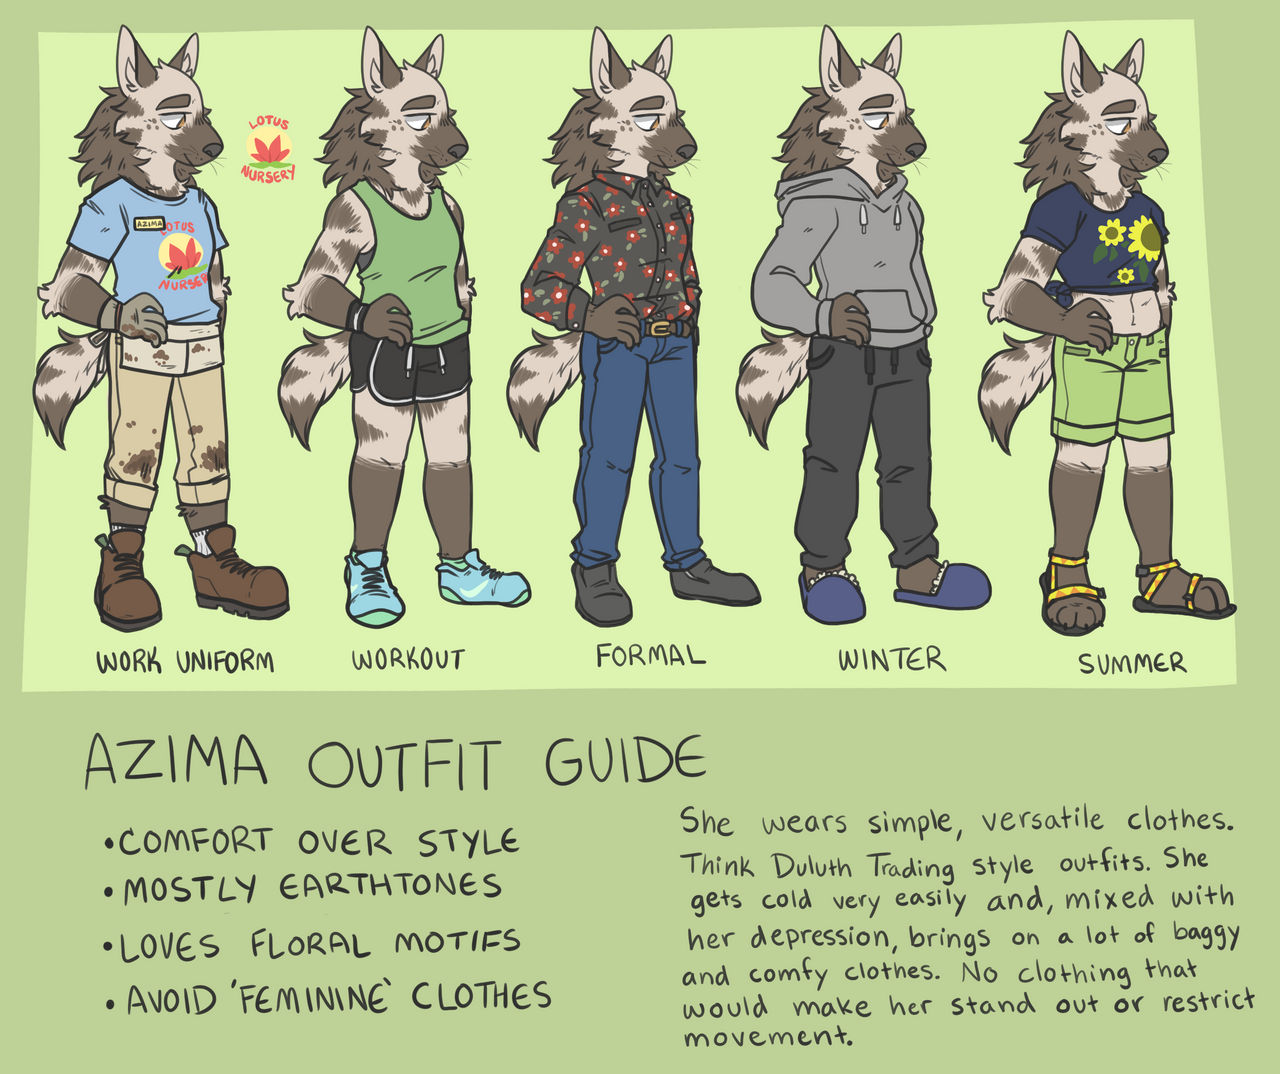 azima_outfit_guide_2019_by_freezy_rat_dd